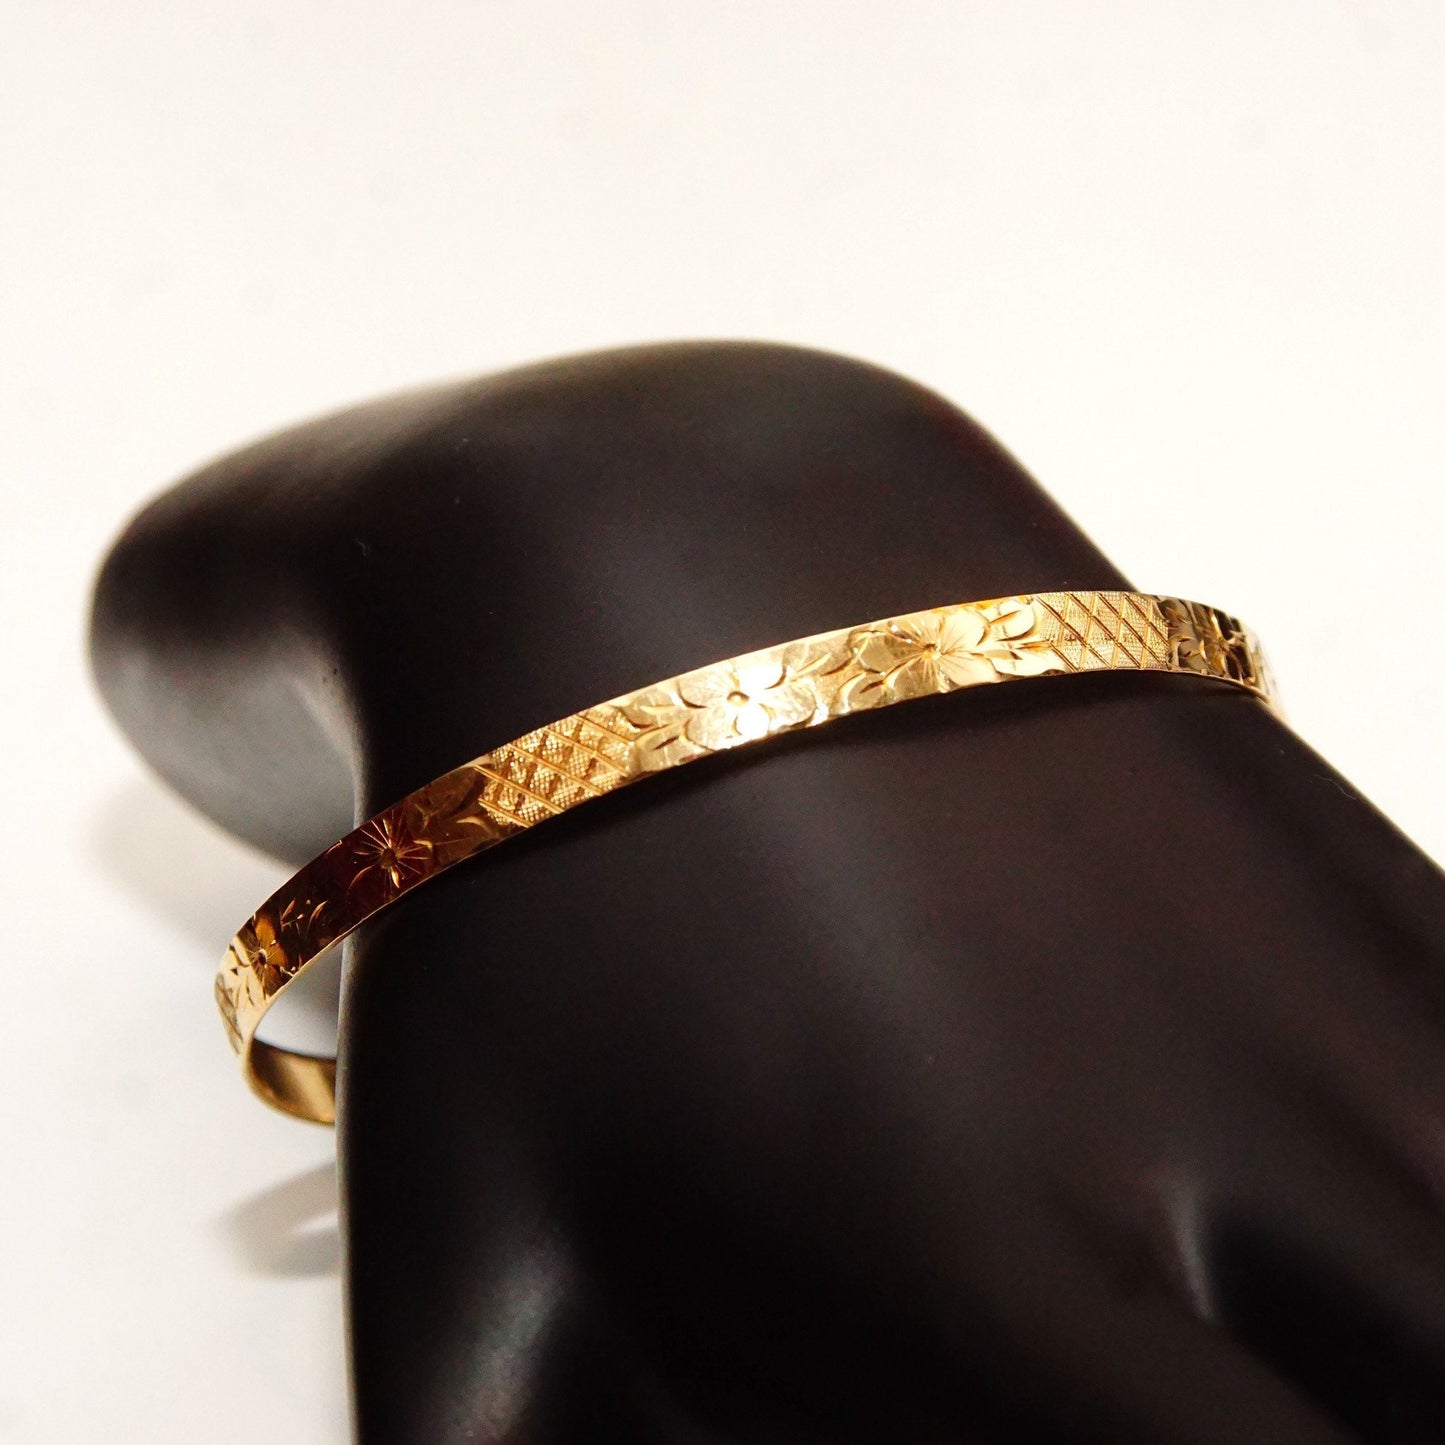 14K solid yellow gold bangle bracelet with floral motifs and diamond-cut designs, 5mm wide, perfect for stacking, shown on dark jewelry display hand.